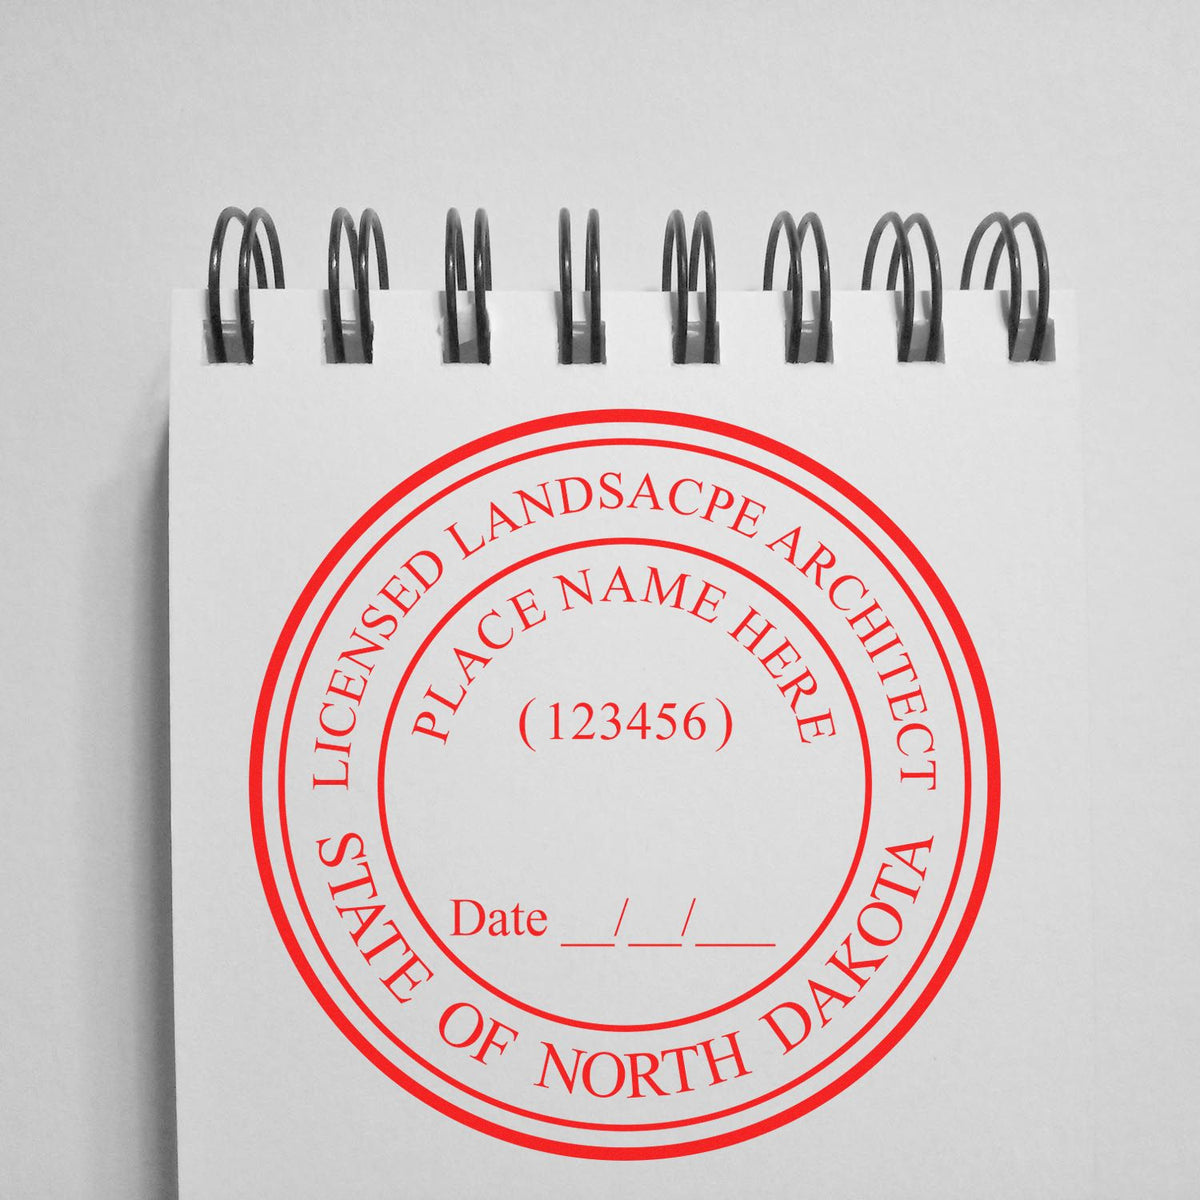 A stamped impression of the Slim Pre-Inked North Dakota Landscape Architect Seal Stamp in this stylish lifestyle photo, setting the tone for a unique and personalized product.